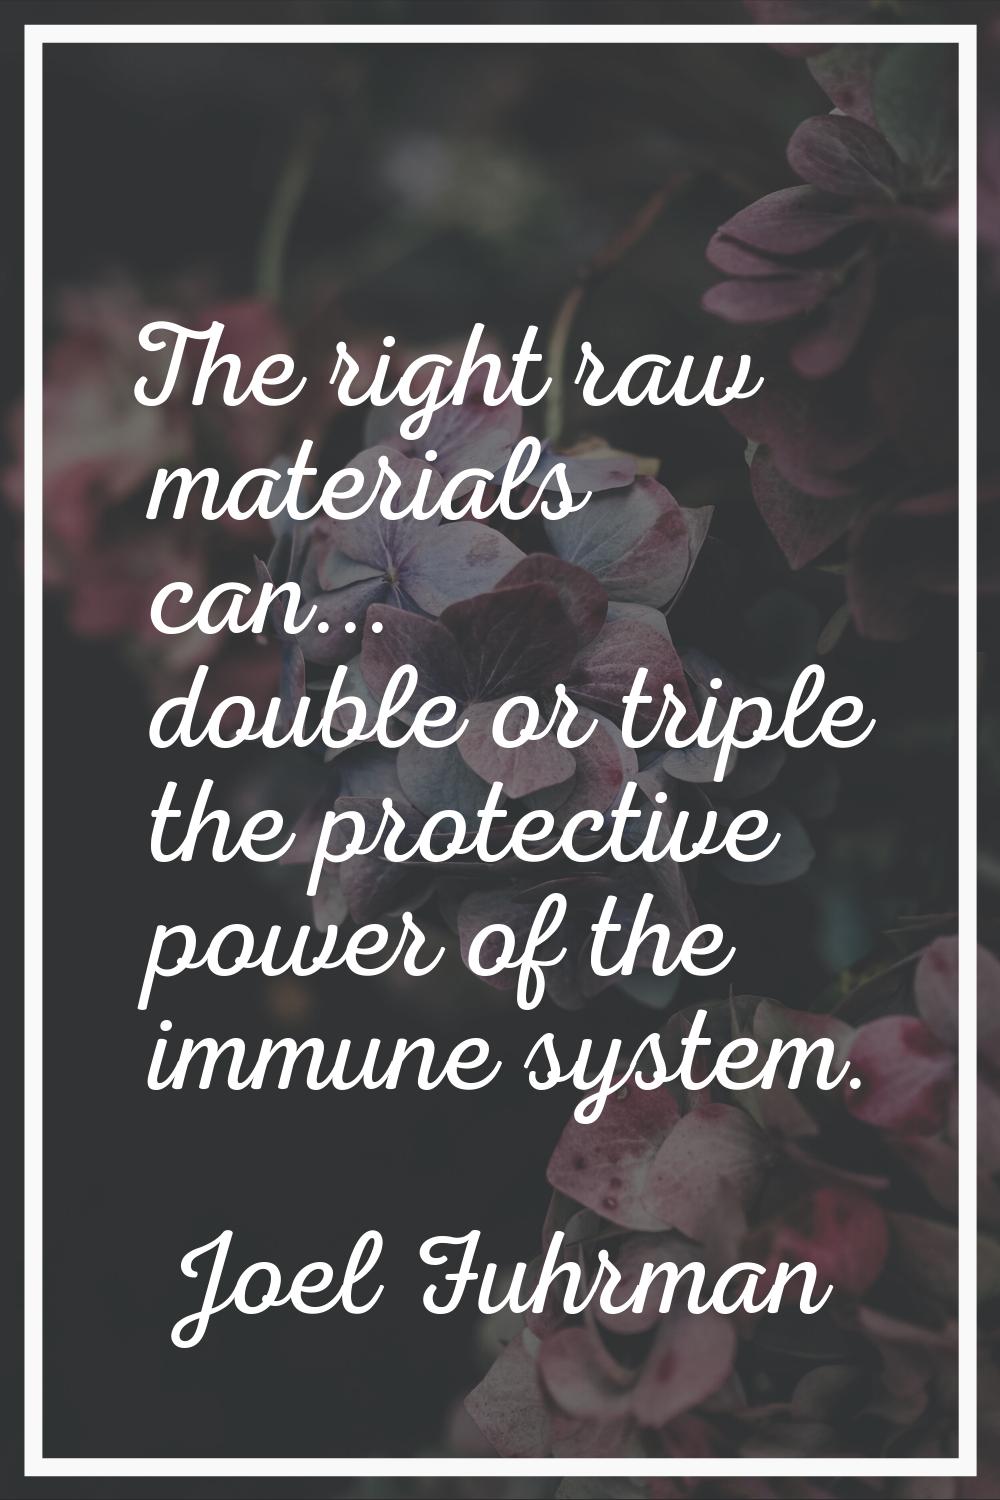 The right raw materials can... double or triple the protective power of the immune system.